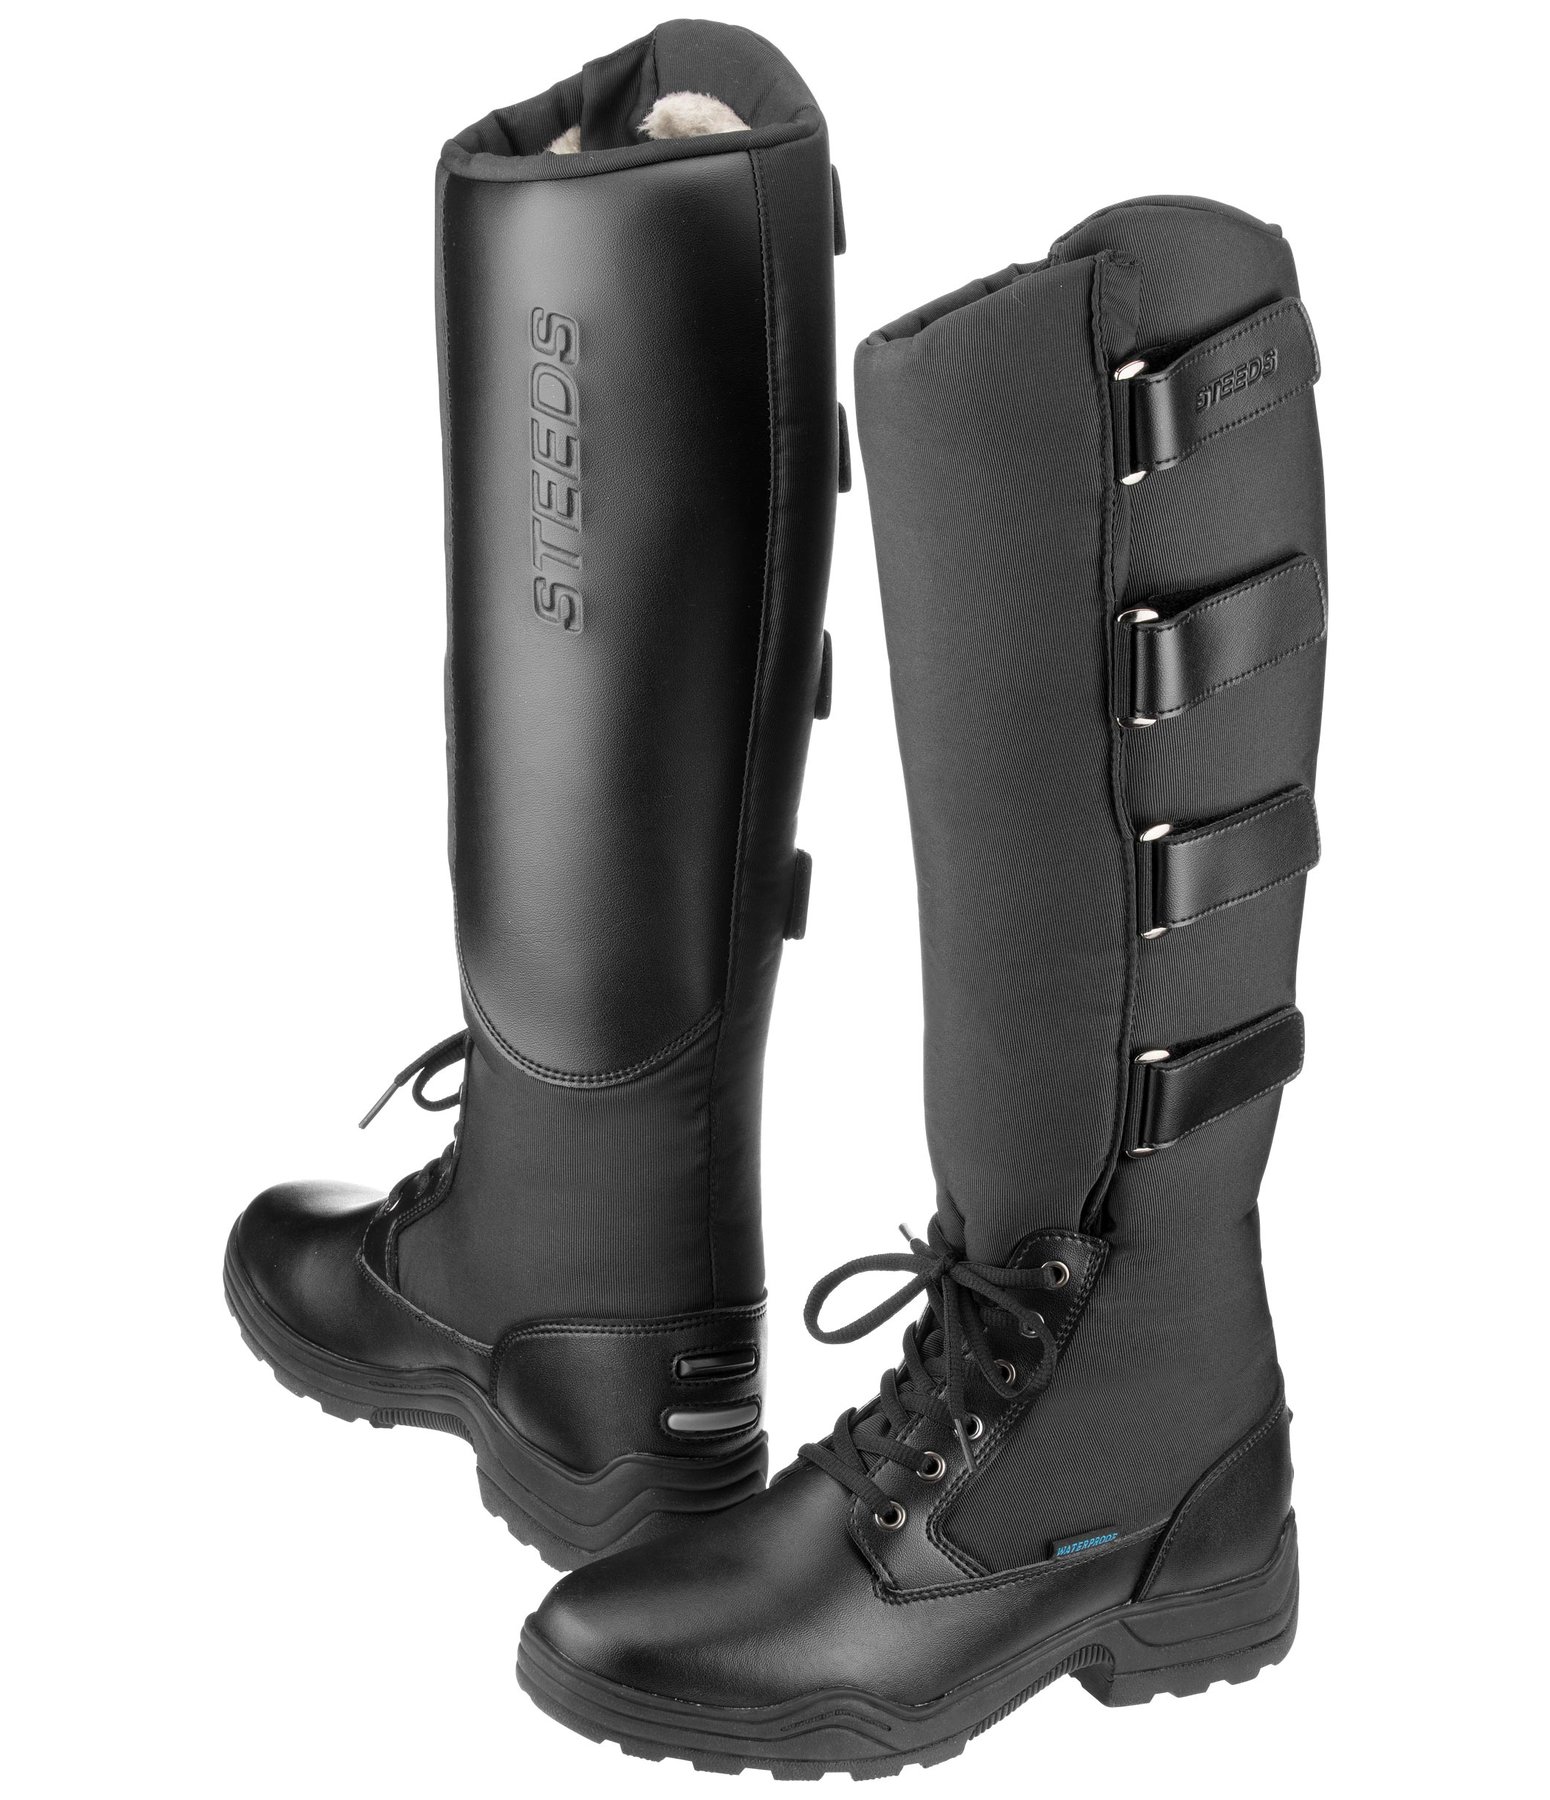 Bottes d'hiver thermiques  Rider XV